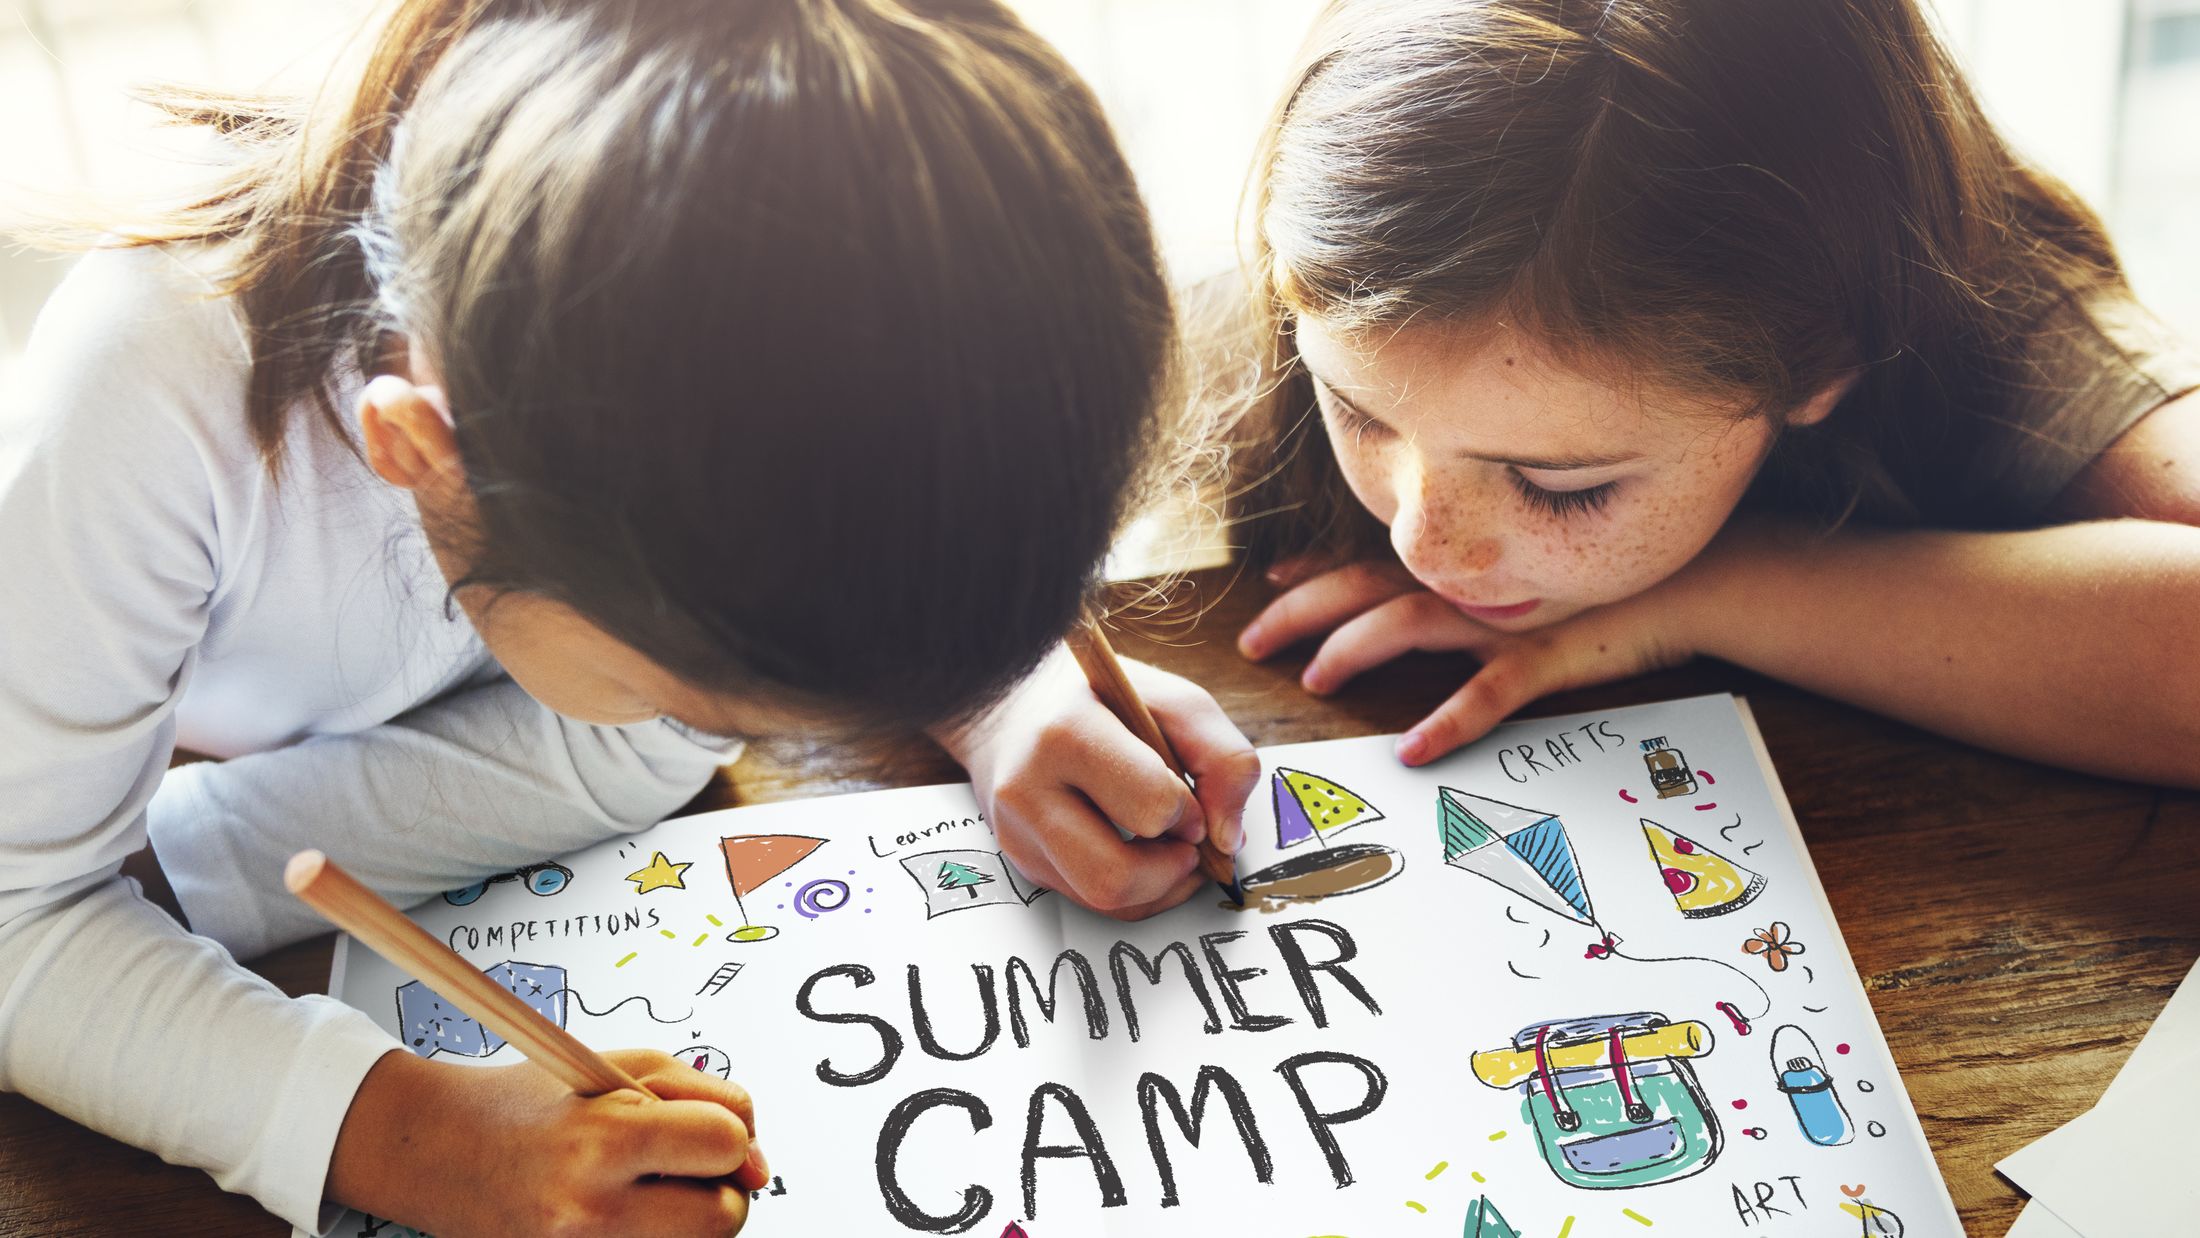 Summer Kids Camp Adventure Explore Concept; Shutterstock ID 446930167; PO: Project Italy - Facilities images; Job: Project Italy - Facilities images; Client: H&J/Citalia